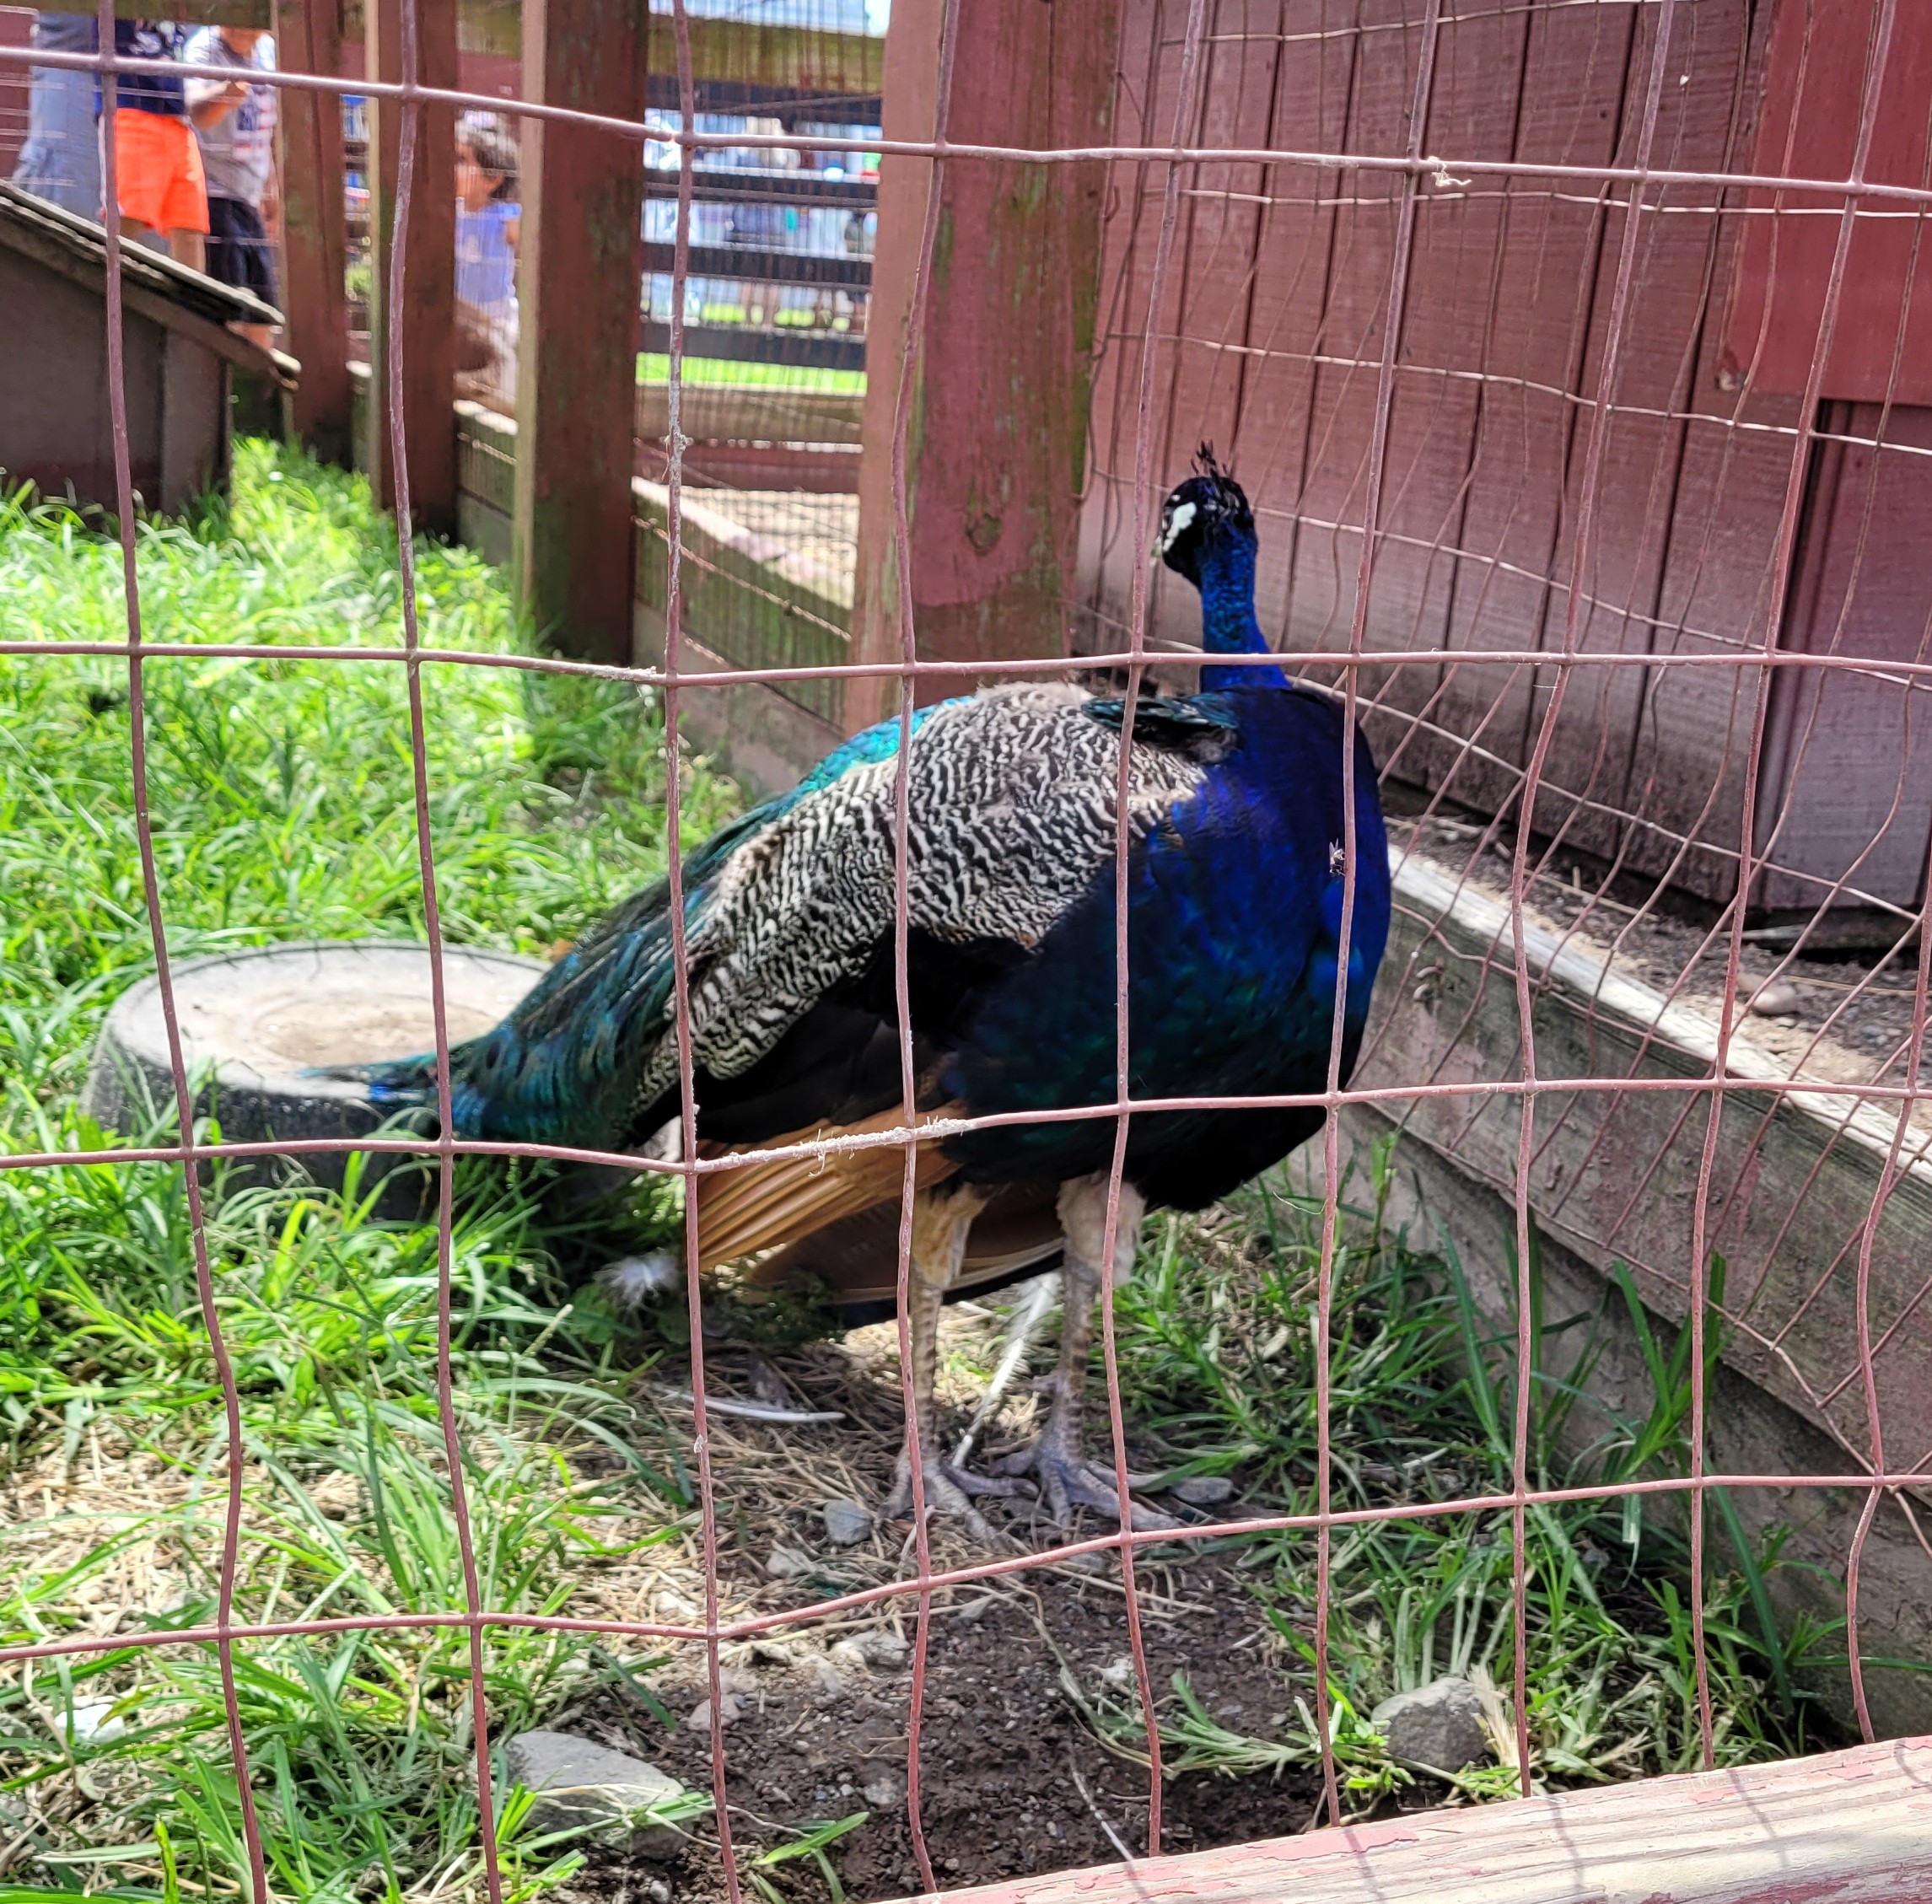 A peacock standing in a pen